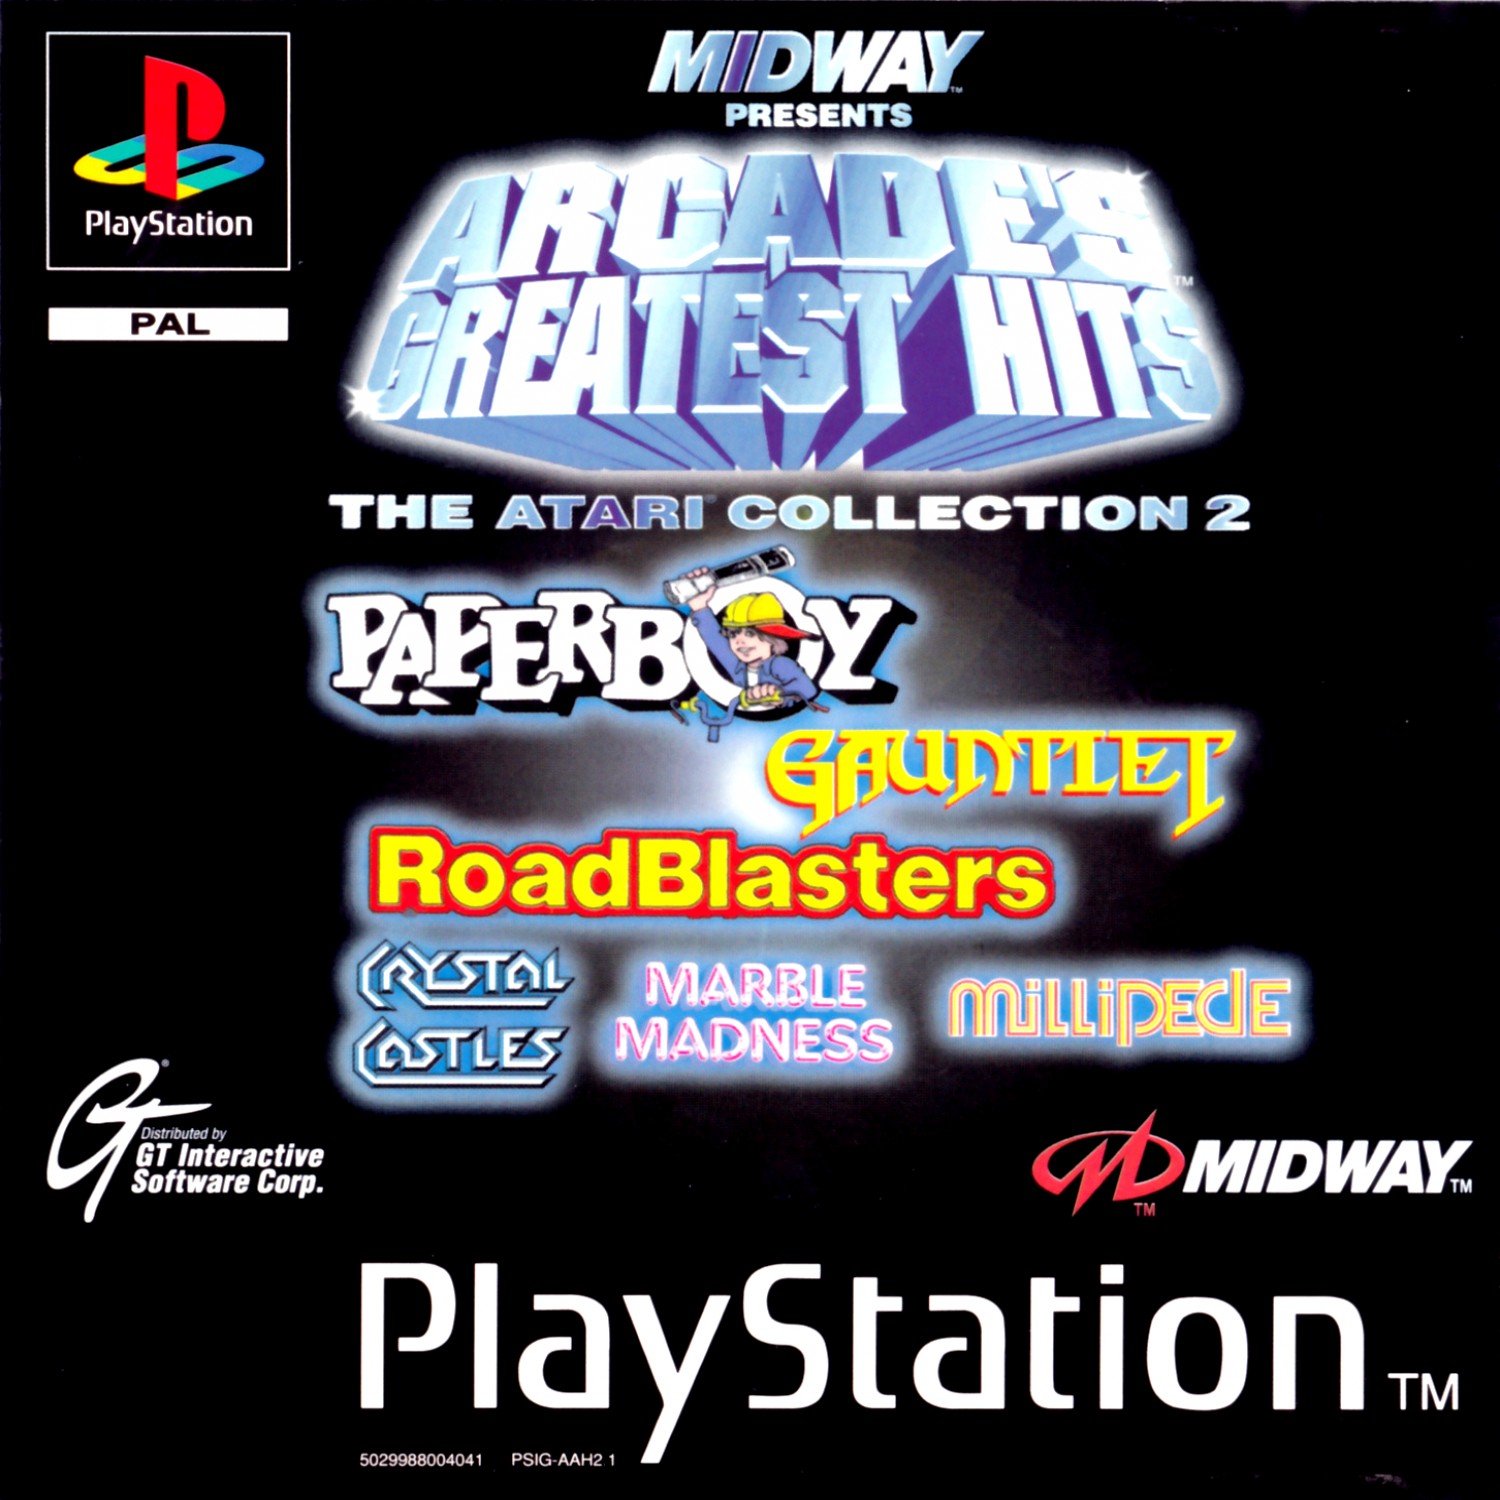 Best collection 2. PLAYSTATION Greatest Hits игры. Аркадные игры ps1. Игра аркада на плейстейшен. Atari games ps2.